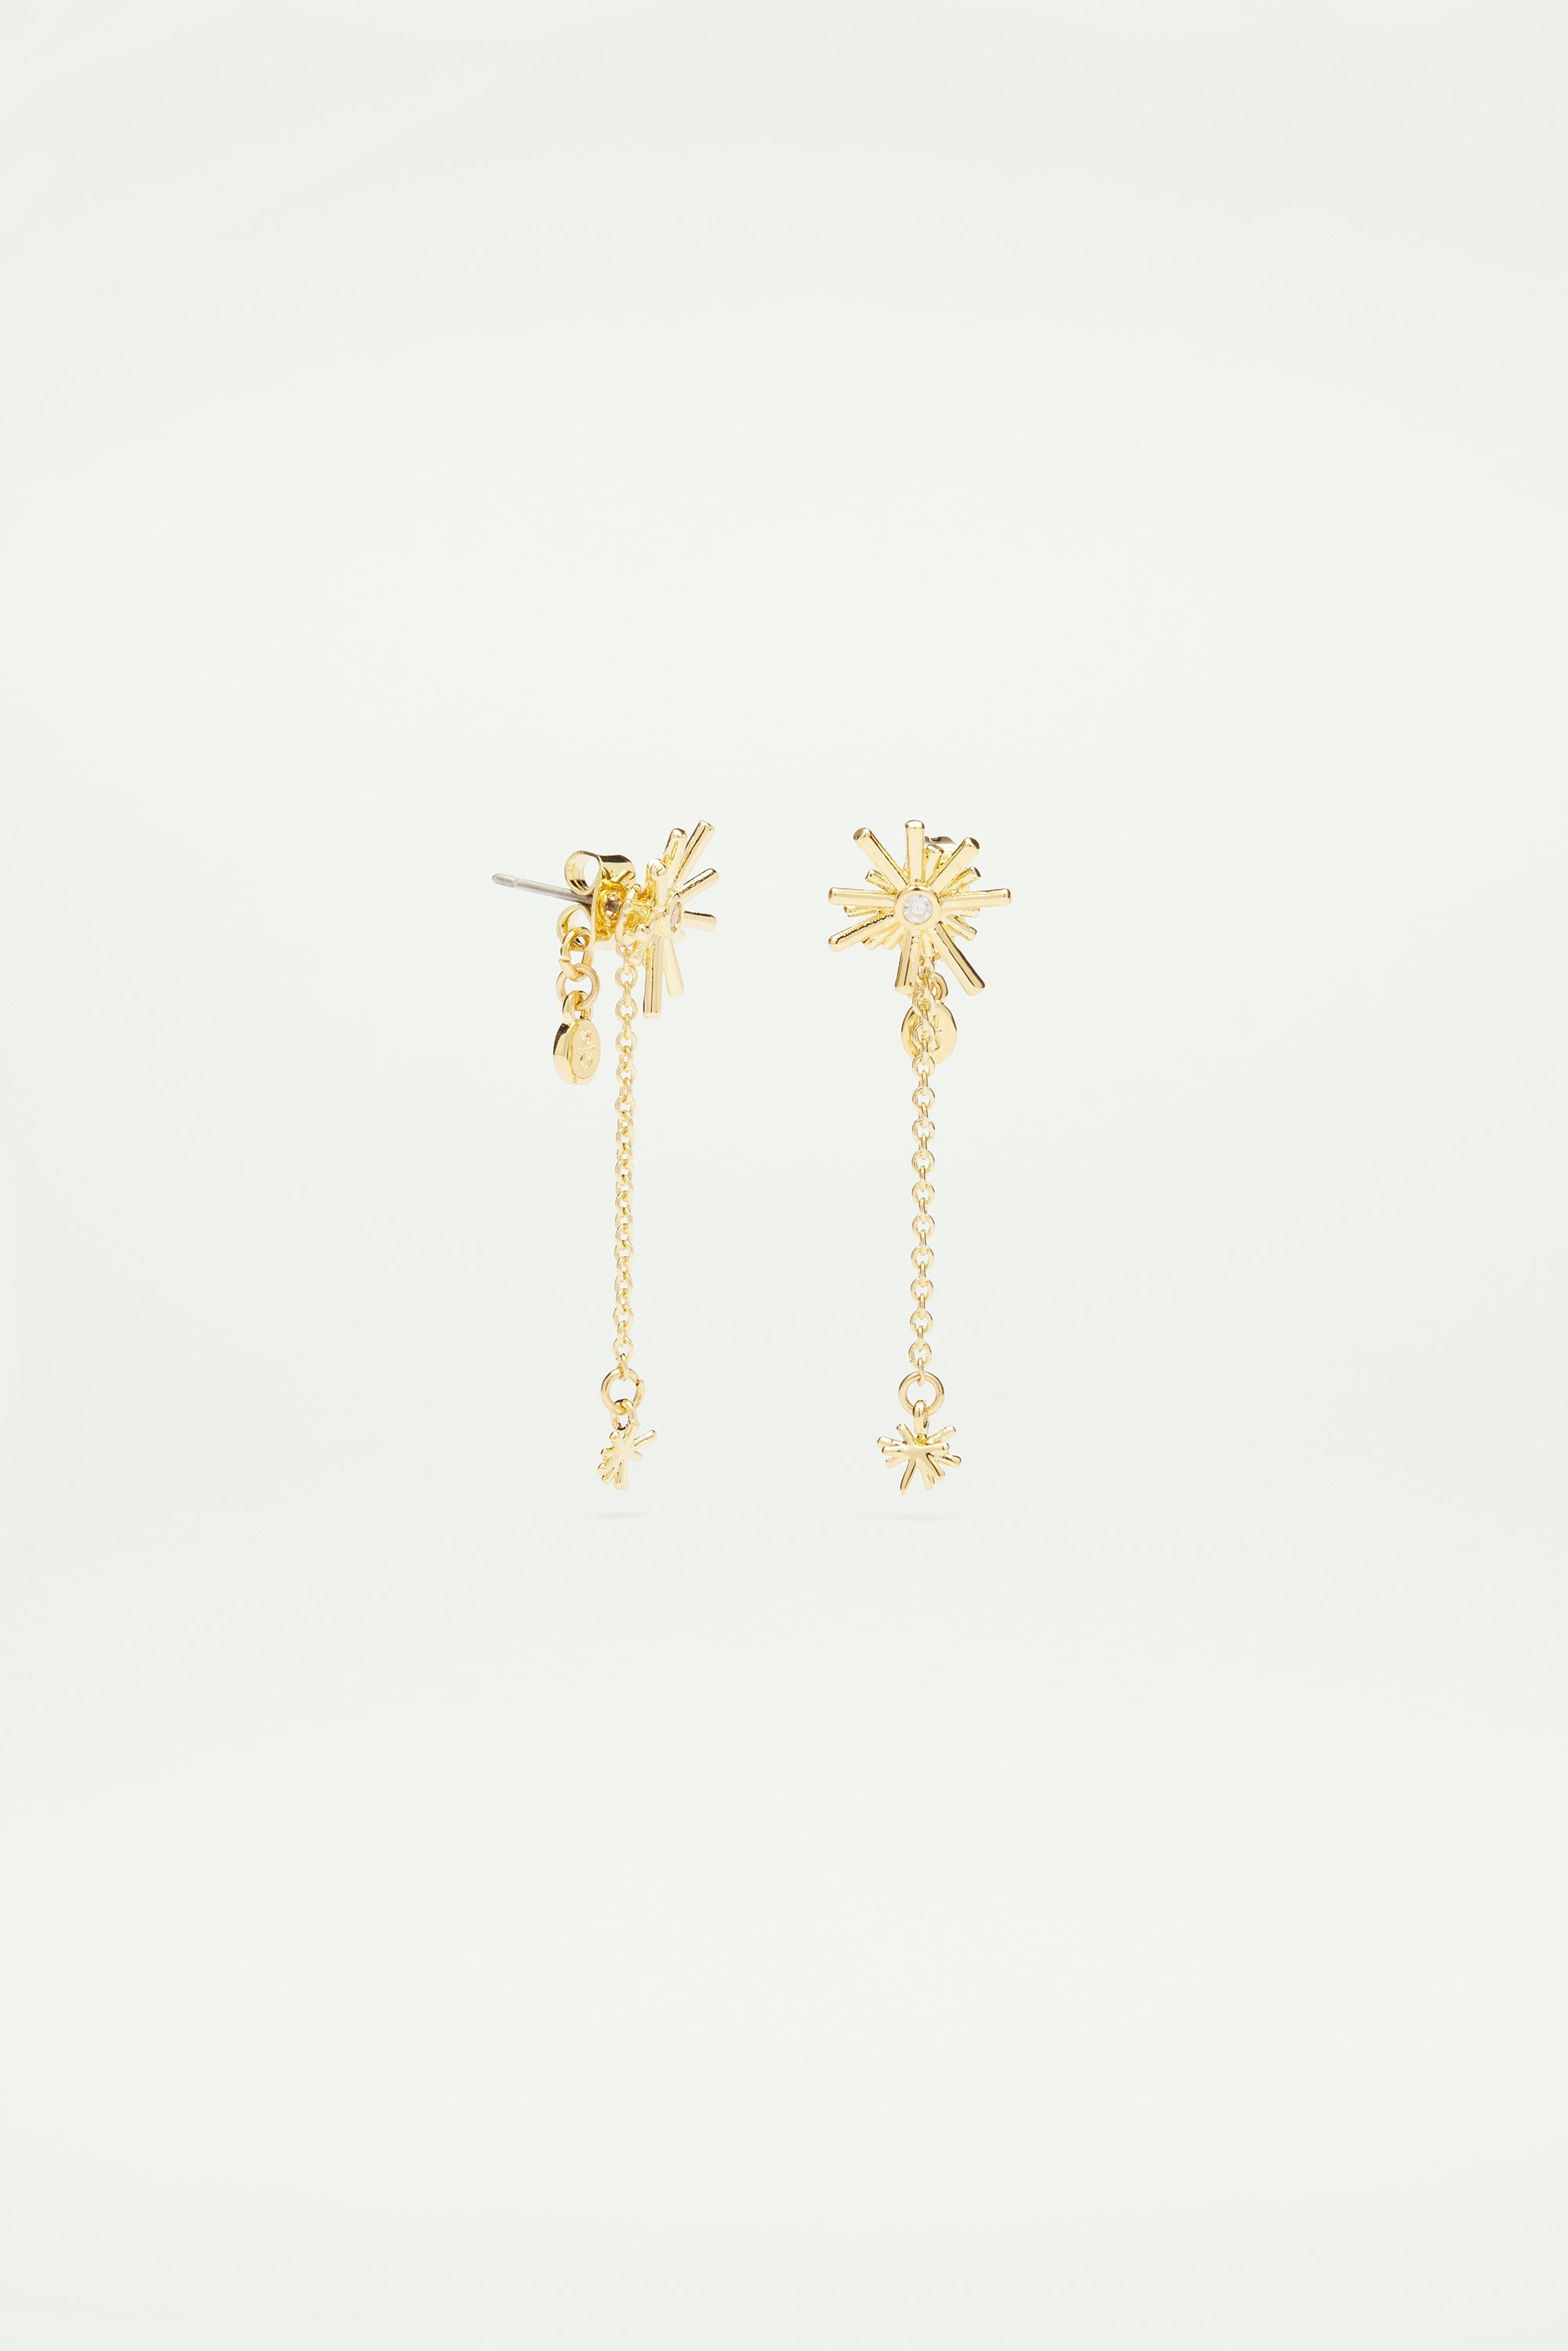 Gold stars and white stone dangling post earrings